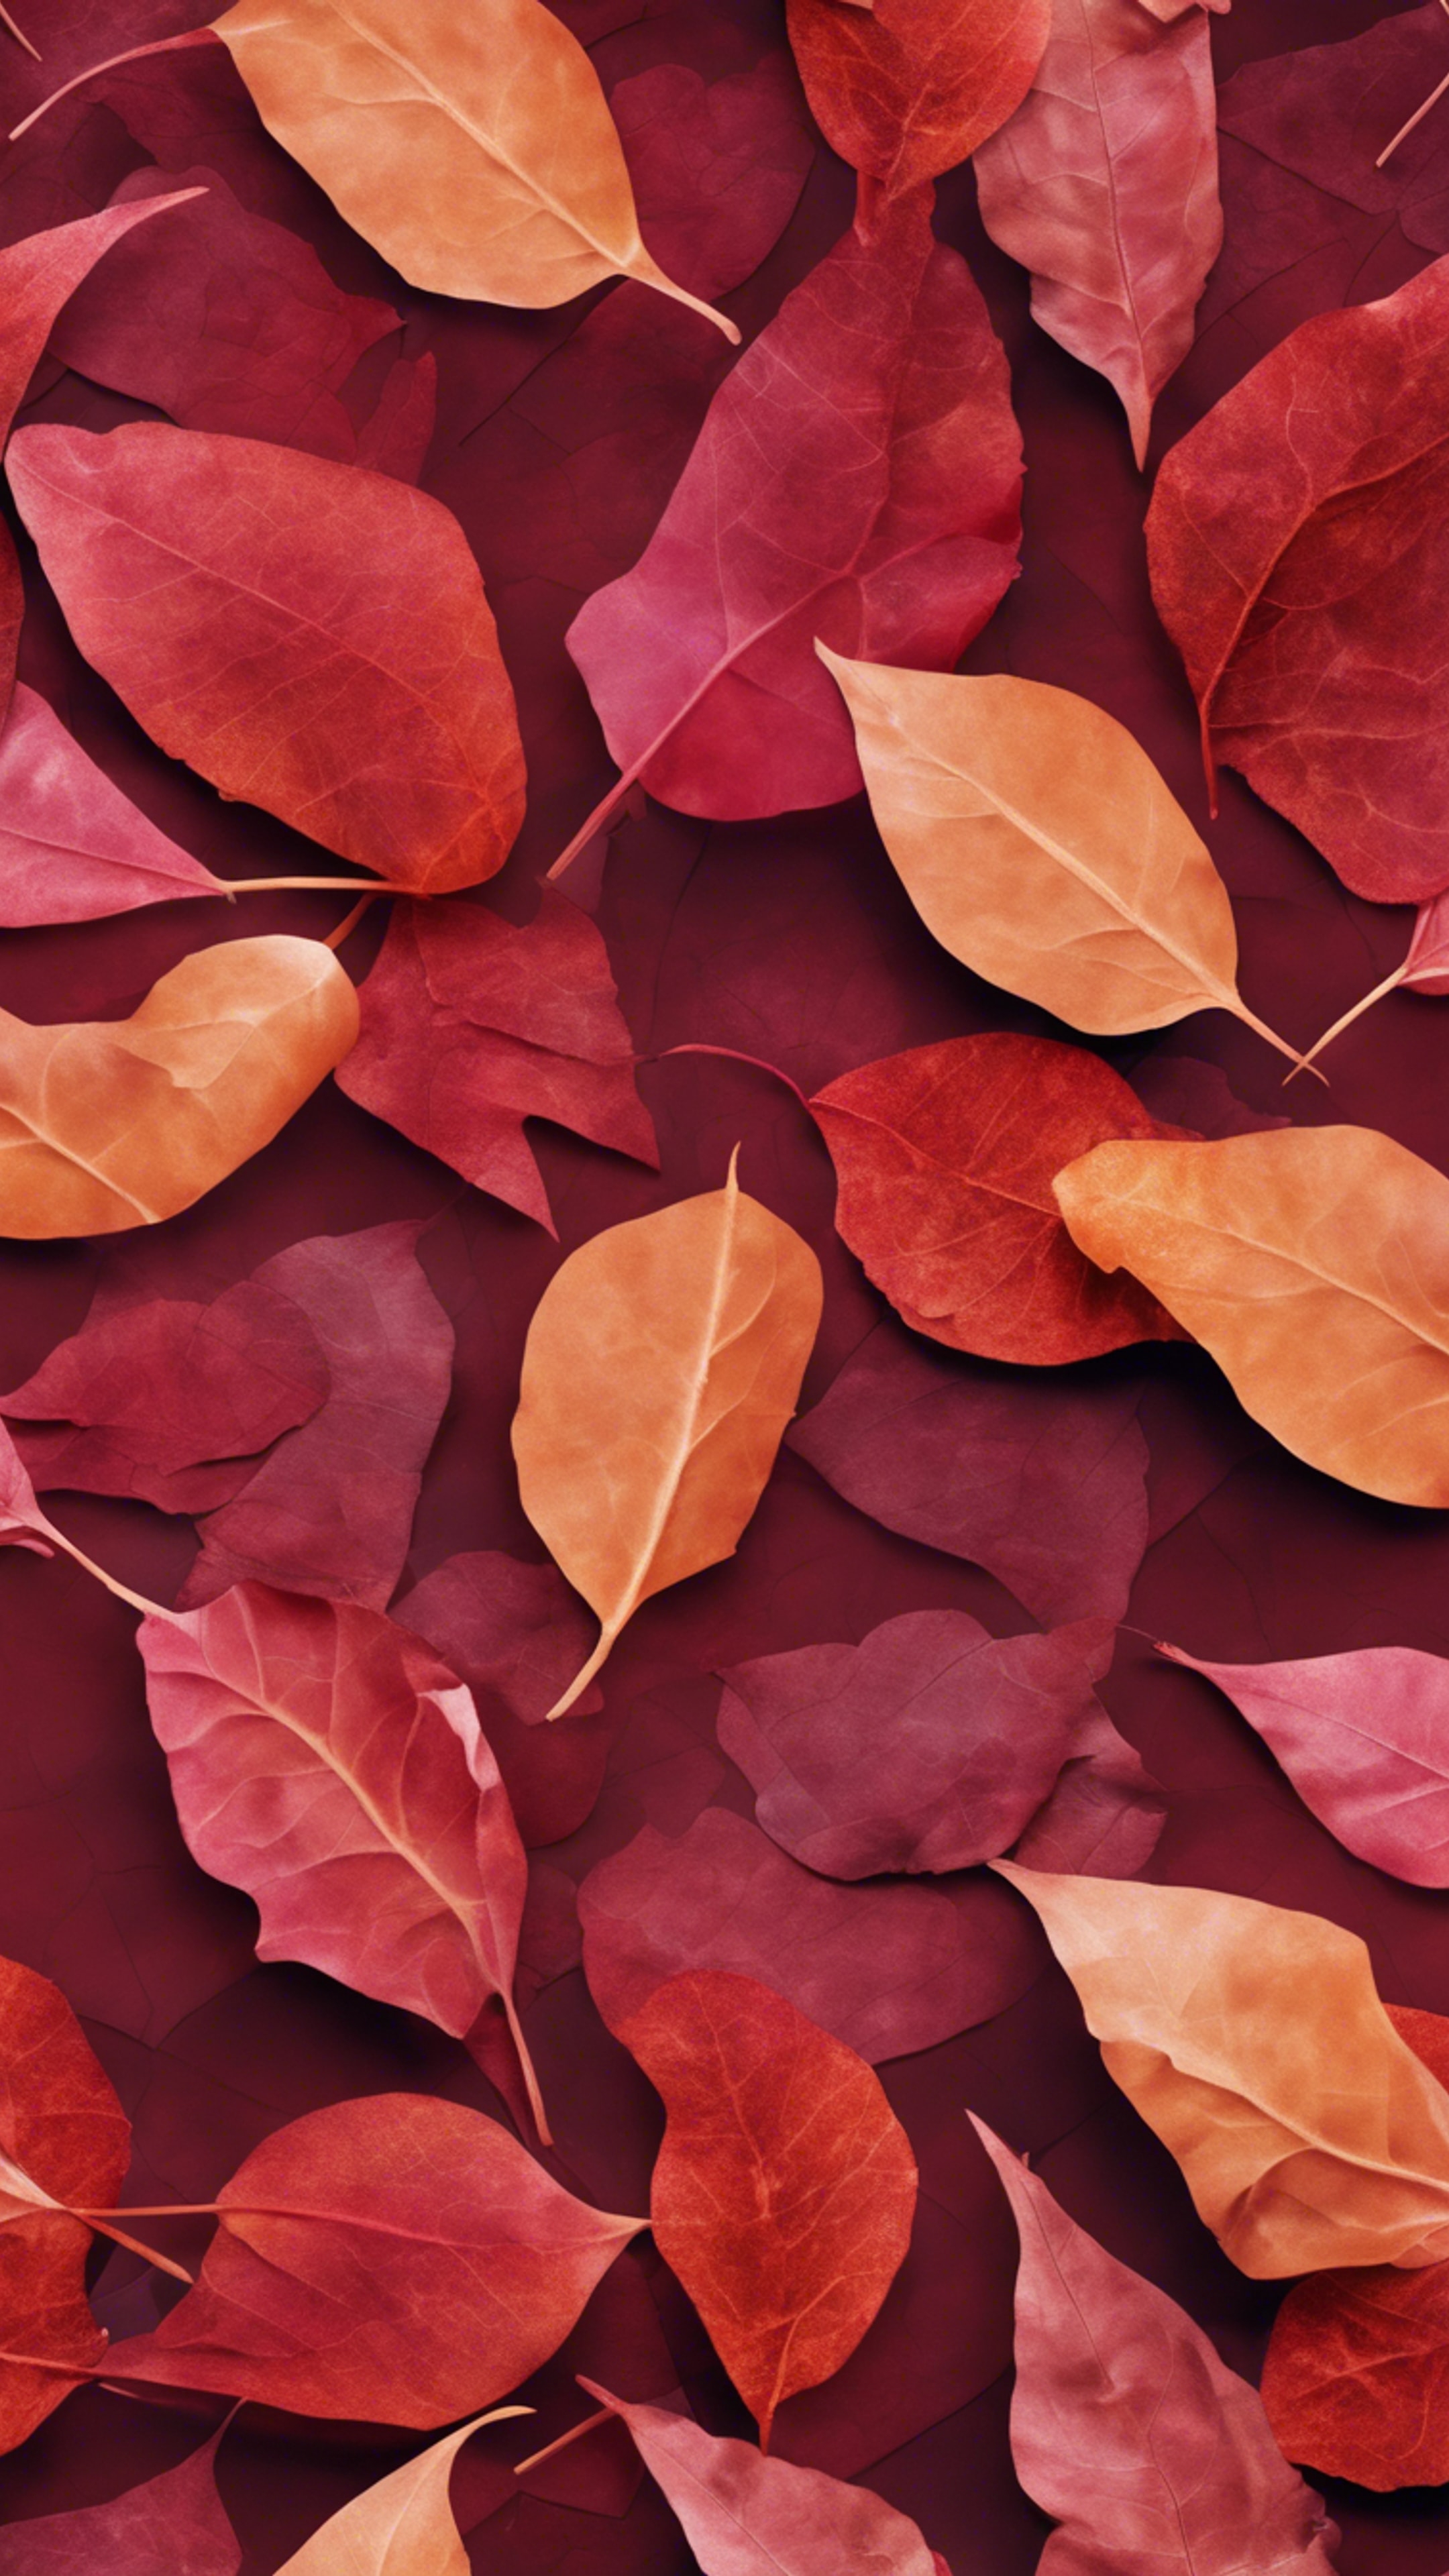 An abstract, tessellating pattern of fiery ruby and russet shapes, reminiscent of falling leaves in autumn. 벽지[1bca3c6cf9b9400393d6]